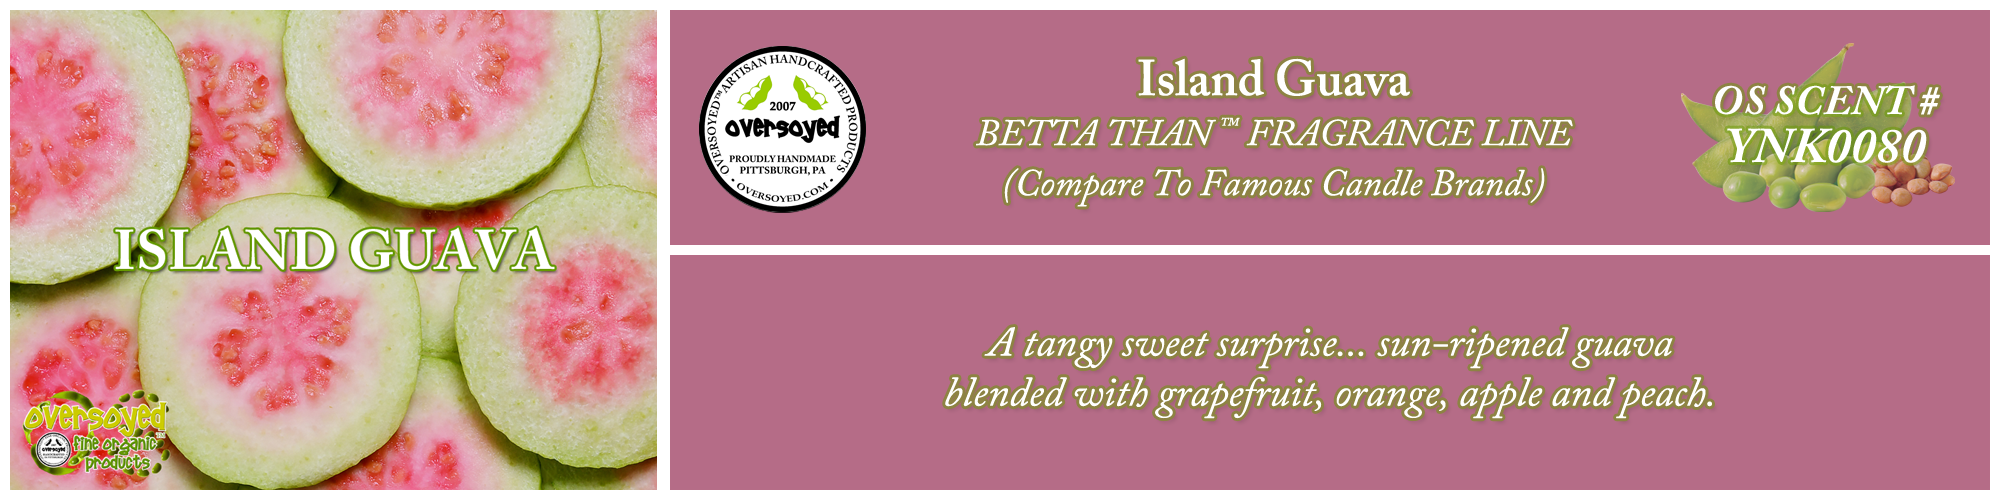 Island Guava Handcrafted Products Collection